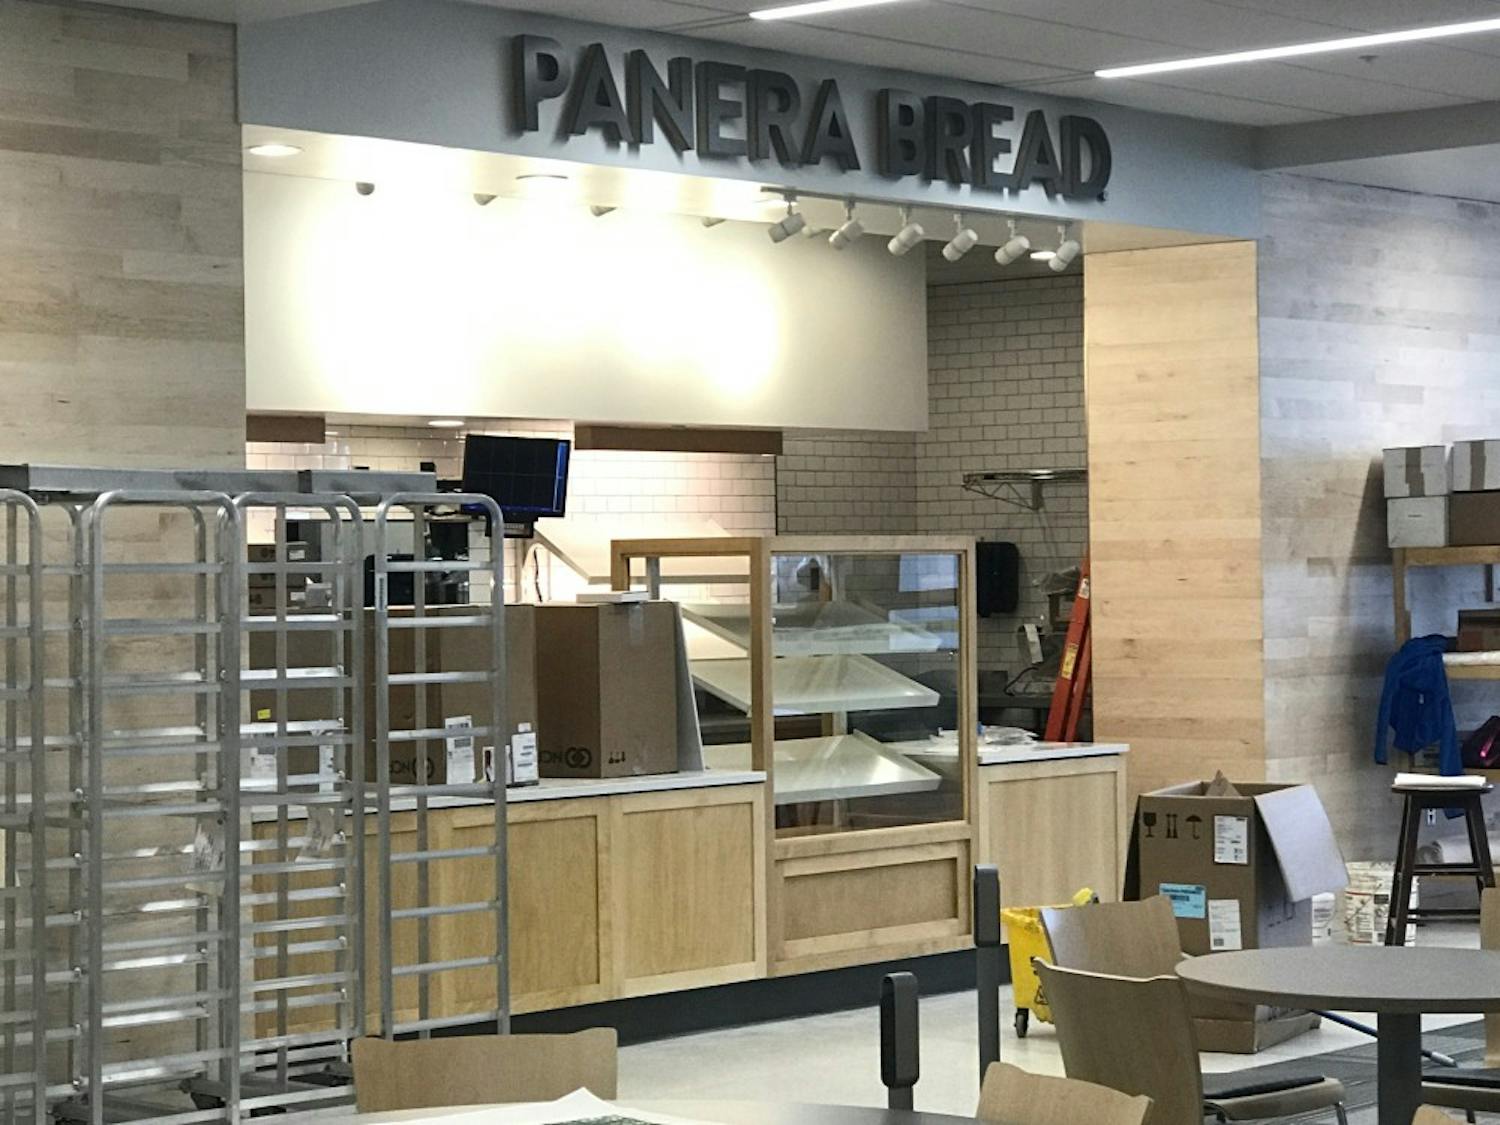 Panera Bread was scheduled to open this spring in RBD Library.​